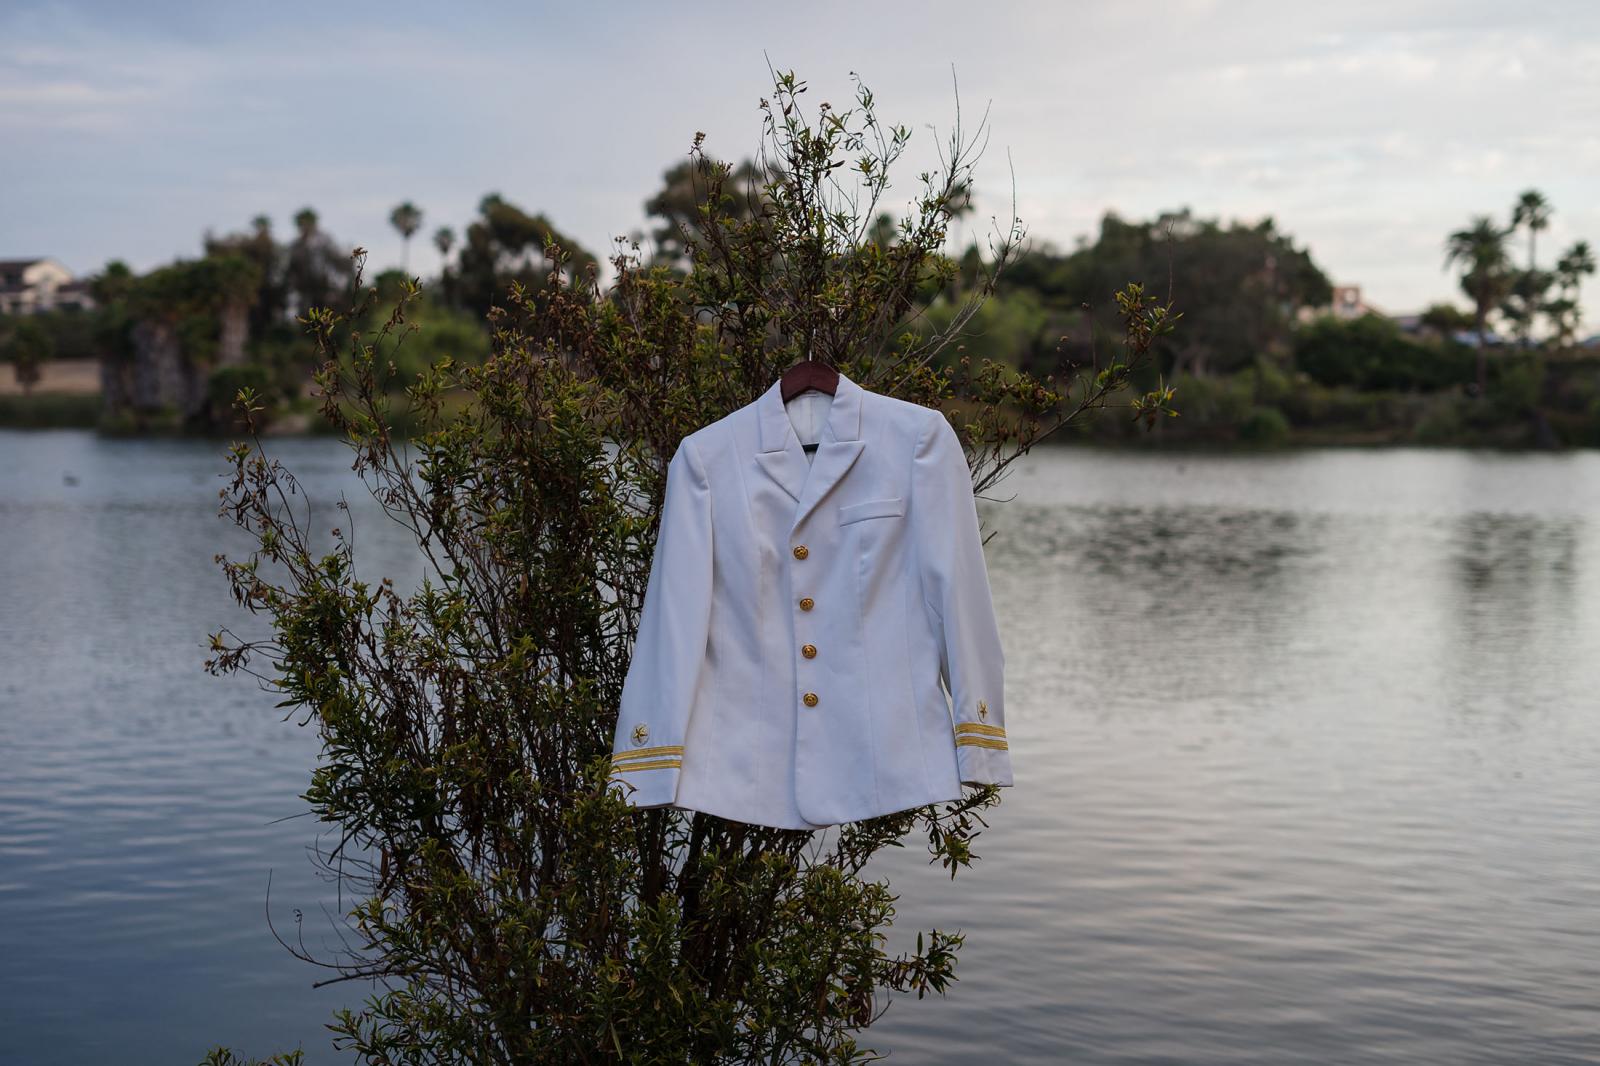 Lyla Kohistany&#39;s US Navy uniform jacket was worn during the summer season hangs on a tree at Lake Murray in San Diego, California on July 2, 2021. &nbsp;Kohistany left Afghanistan when she was a toddler and didn&#39;t really see Afghanistan until she was 25 years old, U.S. Navy intelligence officer. Her family fled to America in 1982, after her father spoke out against the Soviet occupation.